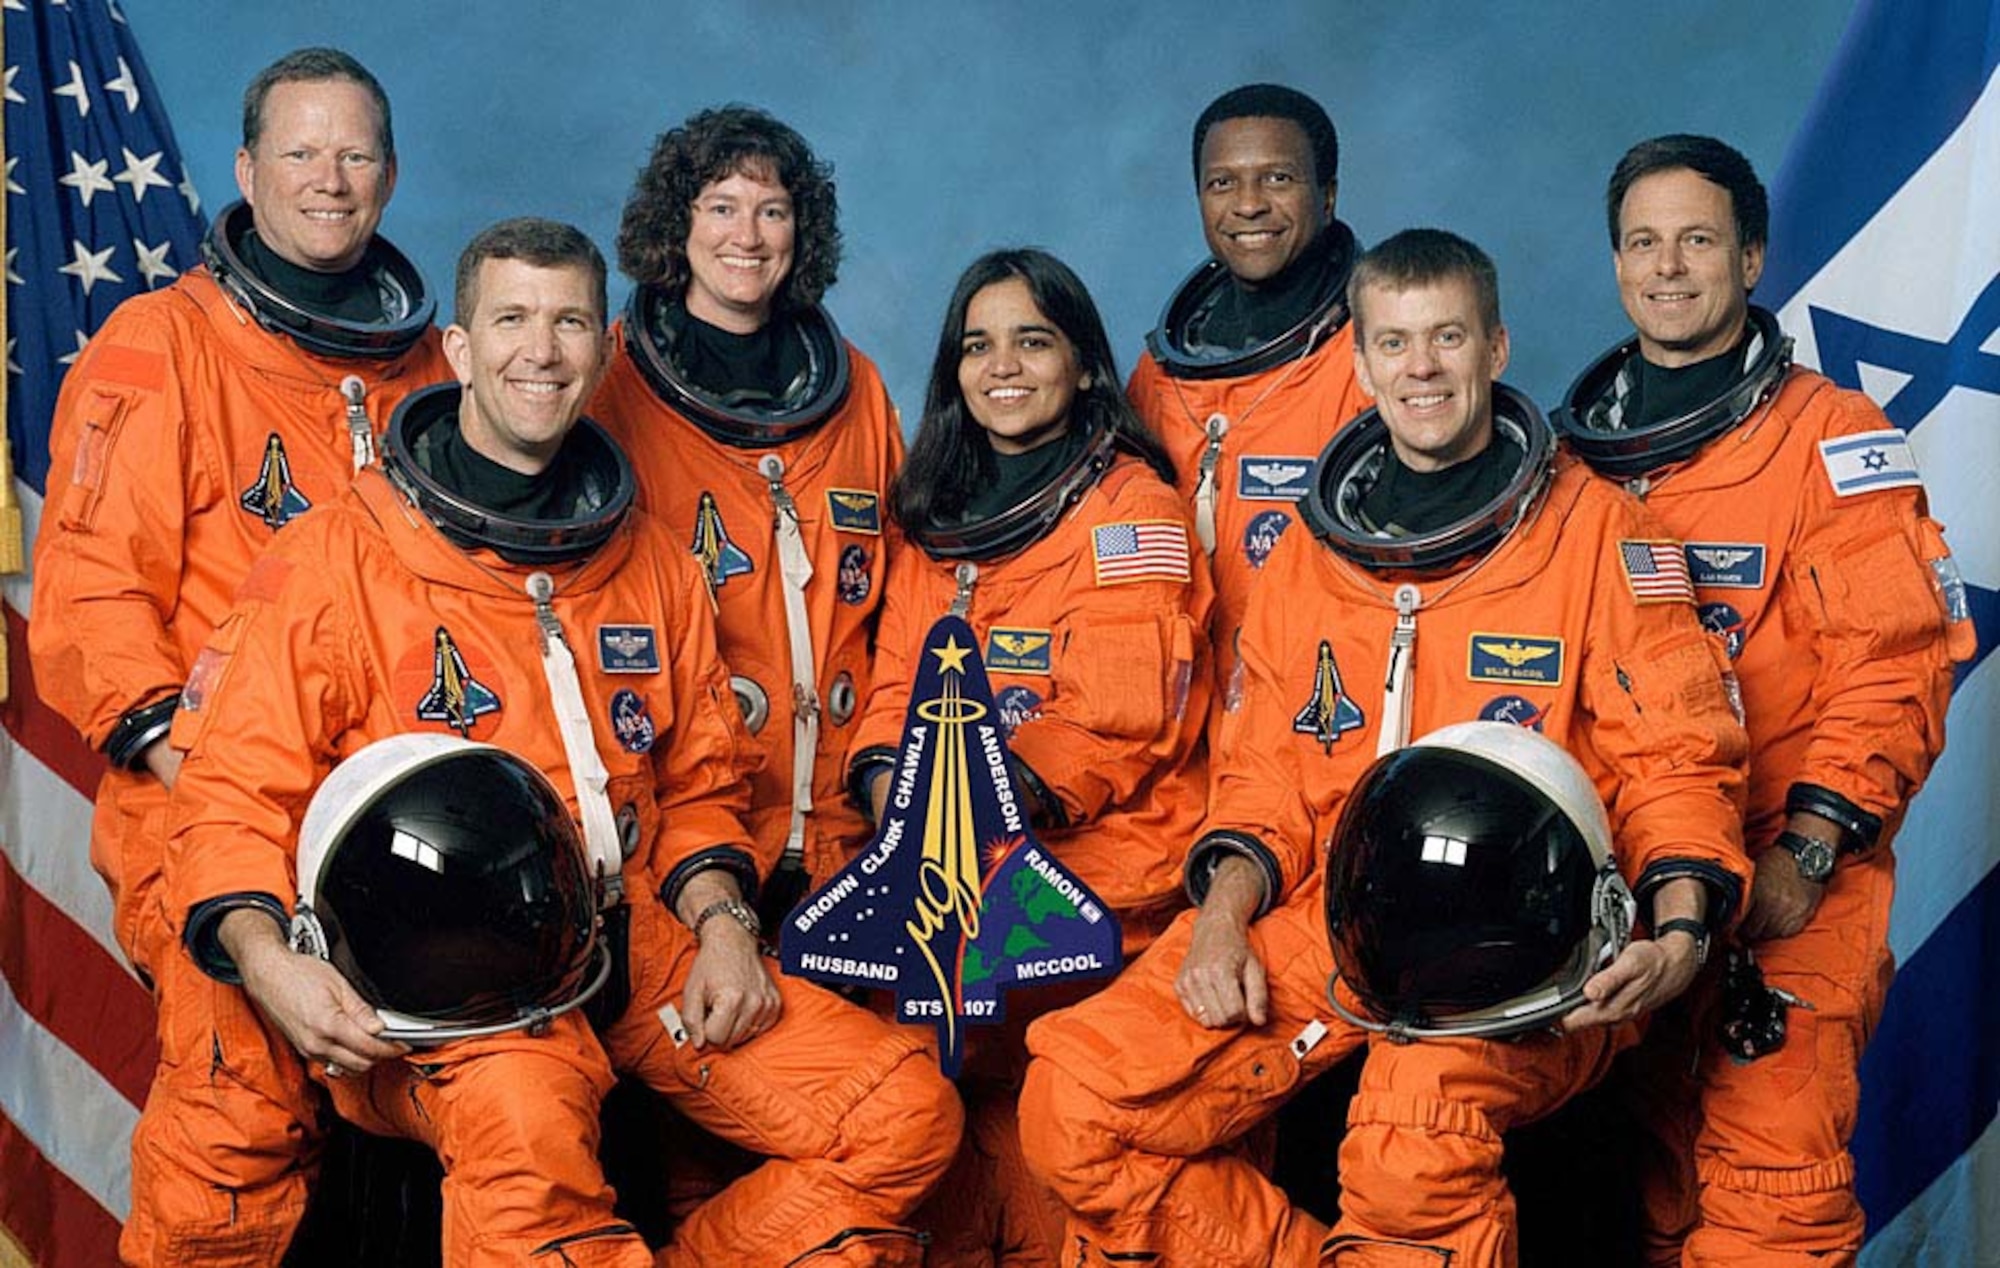 Members of the space shuttle Columbia who died upon re-entry to Earth's atmosphere in February 2003.